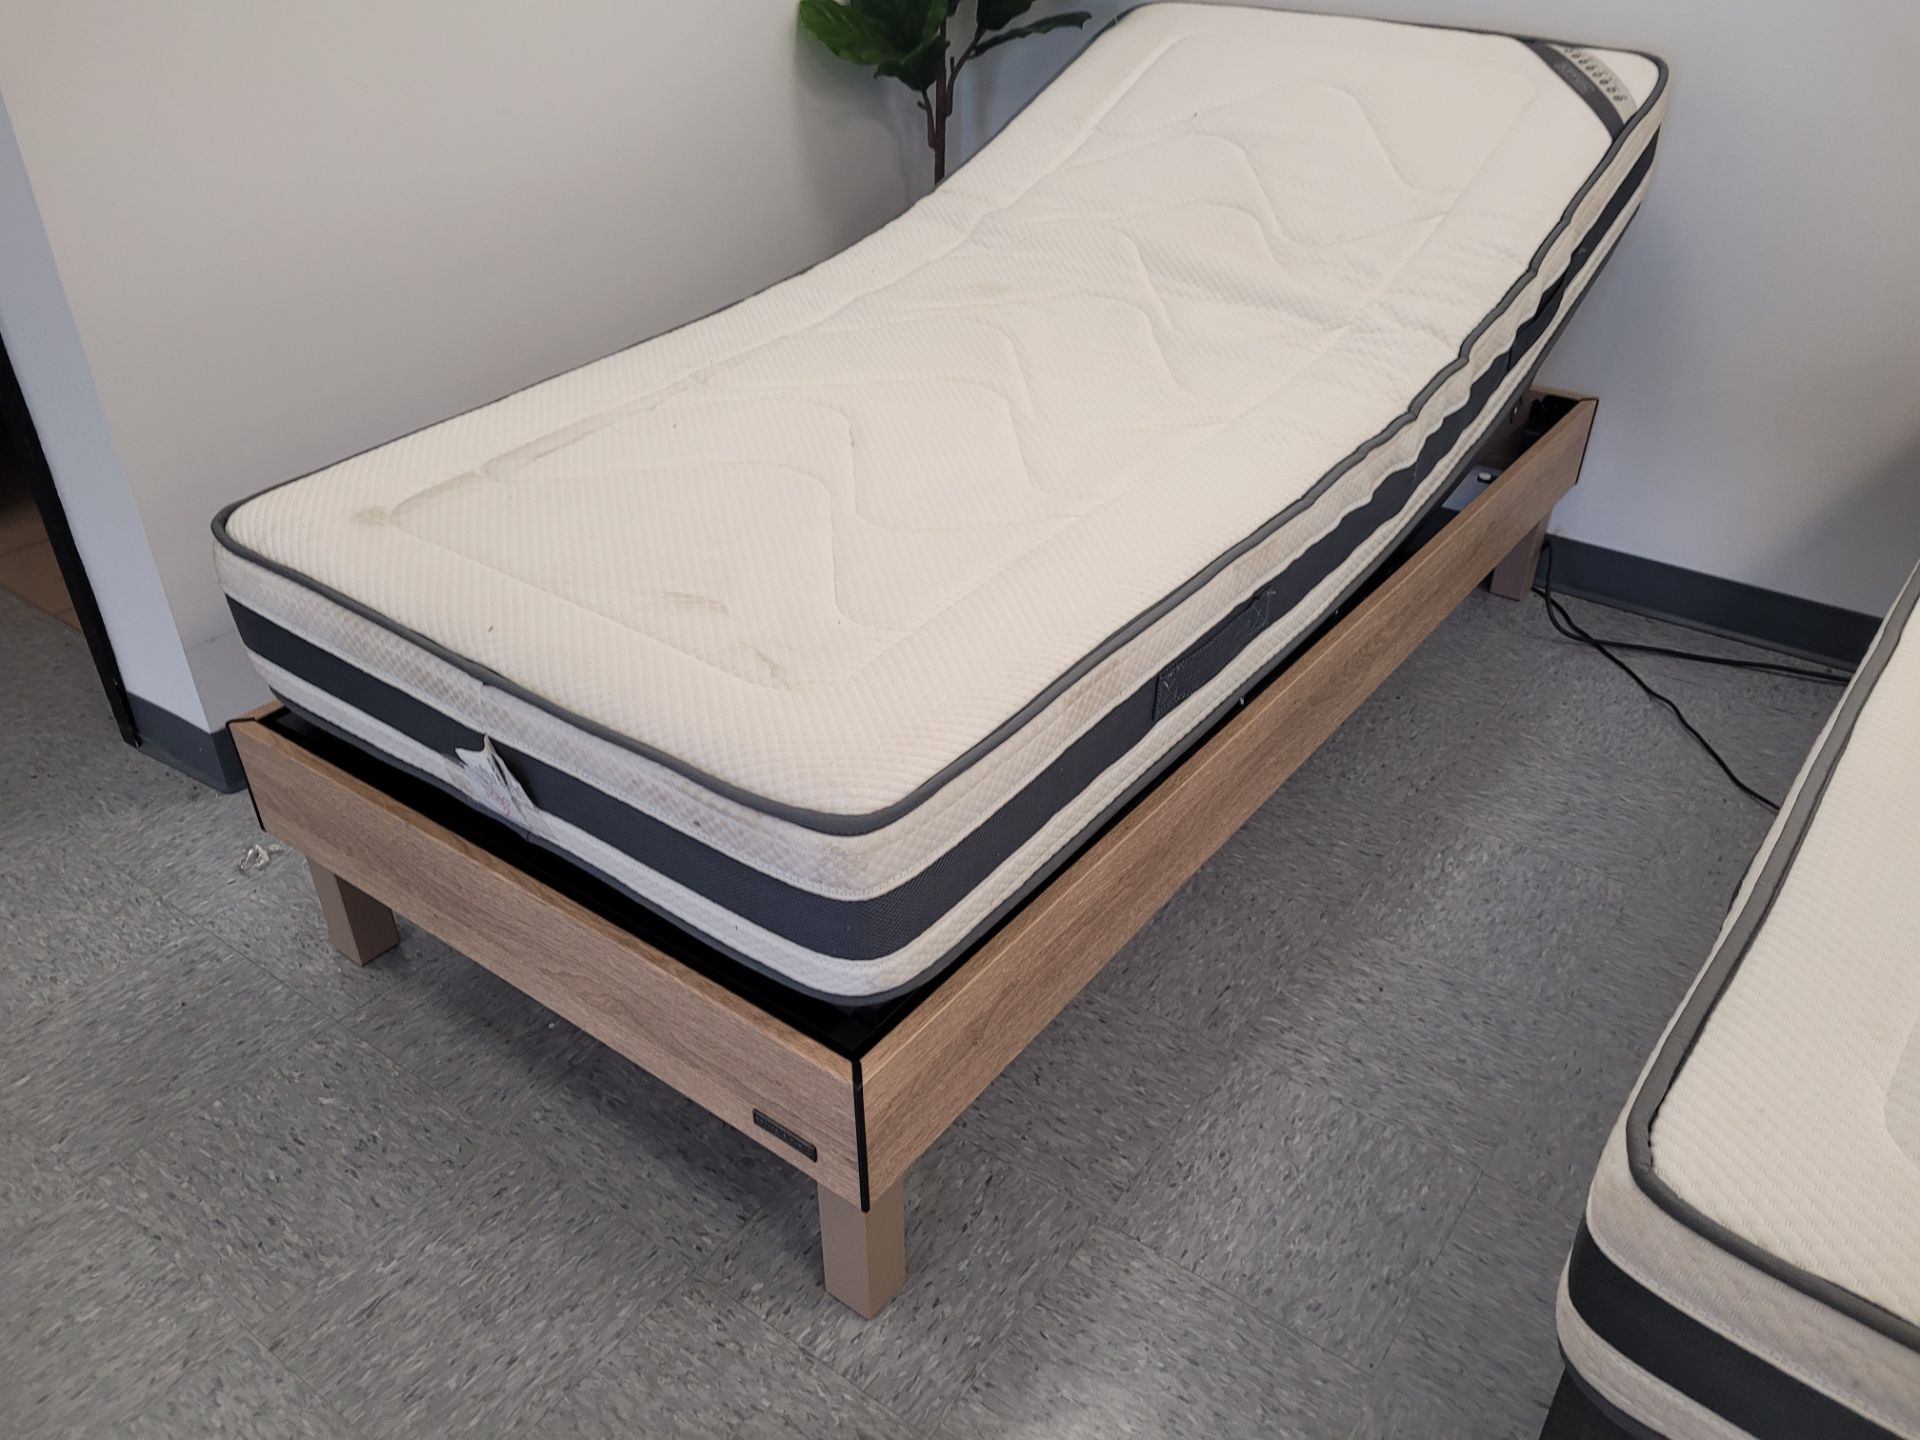 NATURE & PUR Memory Foam Mattress mod. ROYAL LUXE V2, size: 1/2 Queen, 30" x 79.5", hypoallergenic, - Image 3 of 4